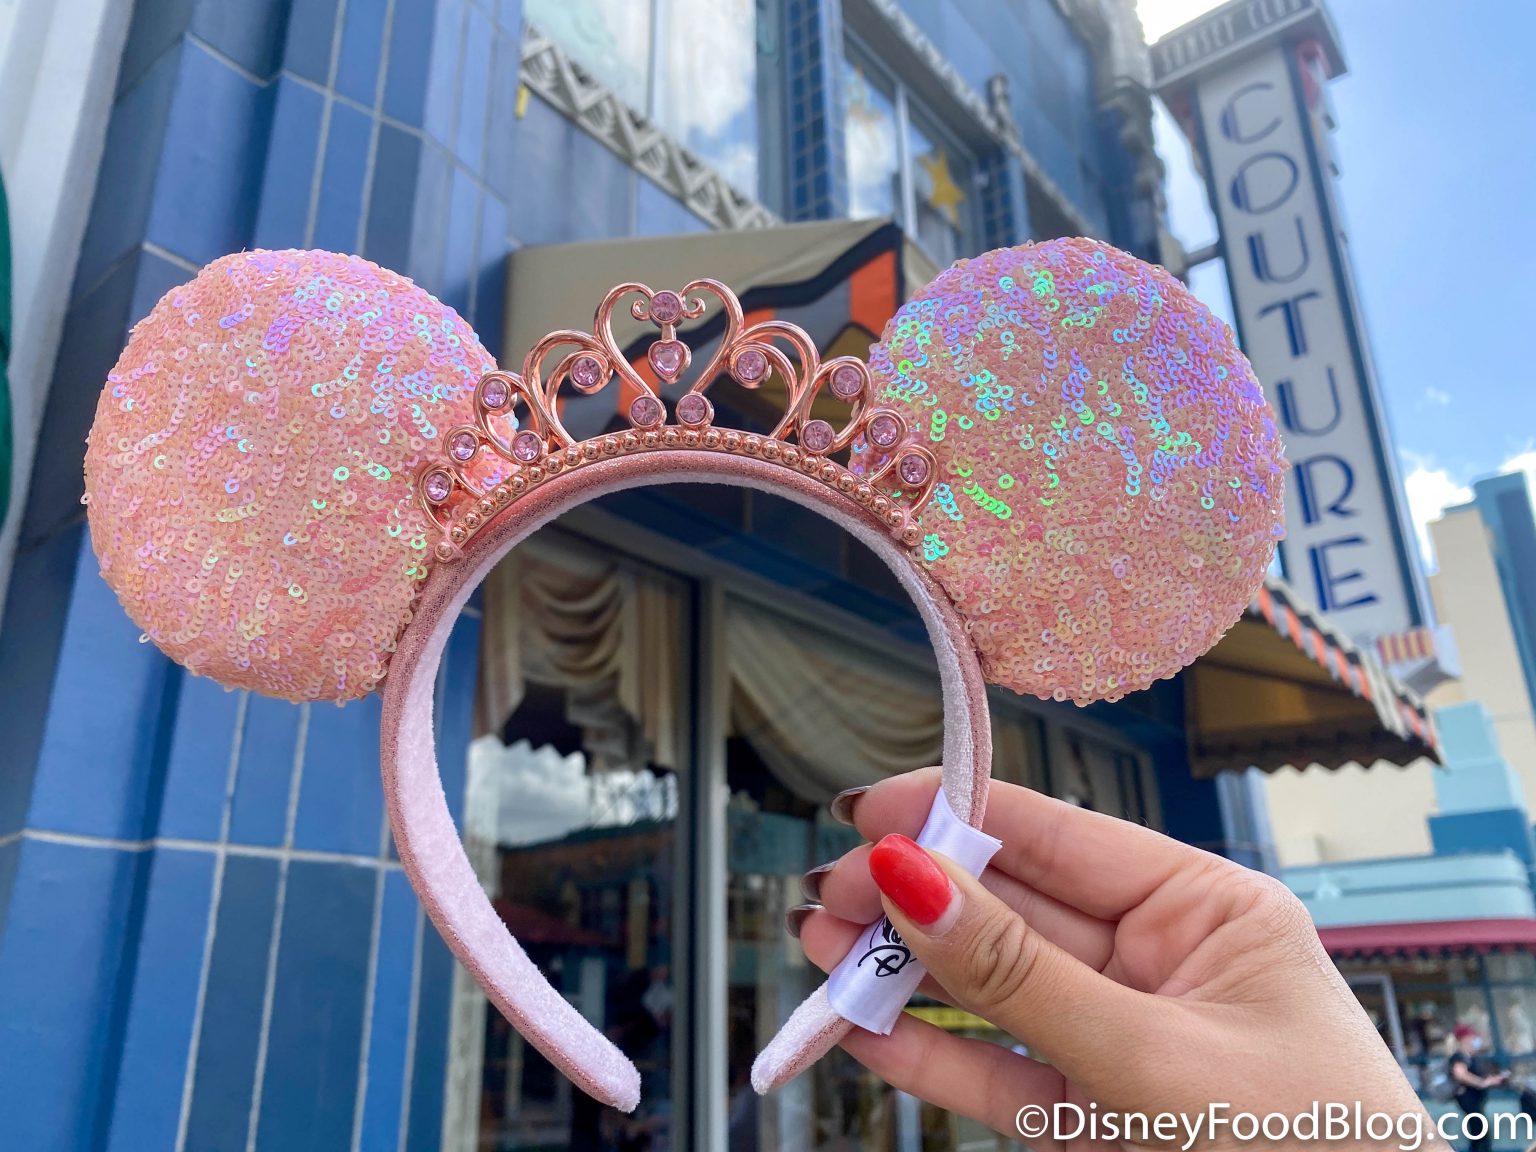 PHOTOS NEW Peachy Queen Minnie Ears Have Arrived in Disney World